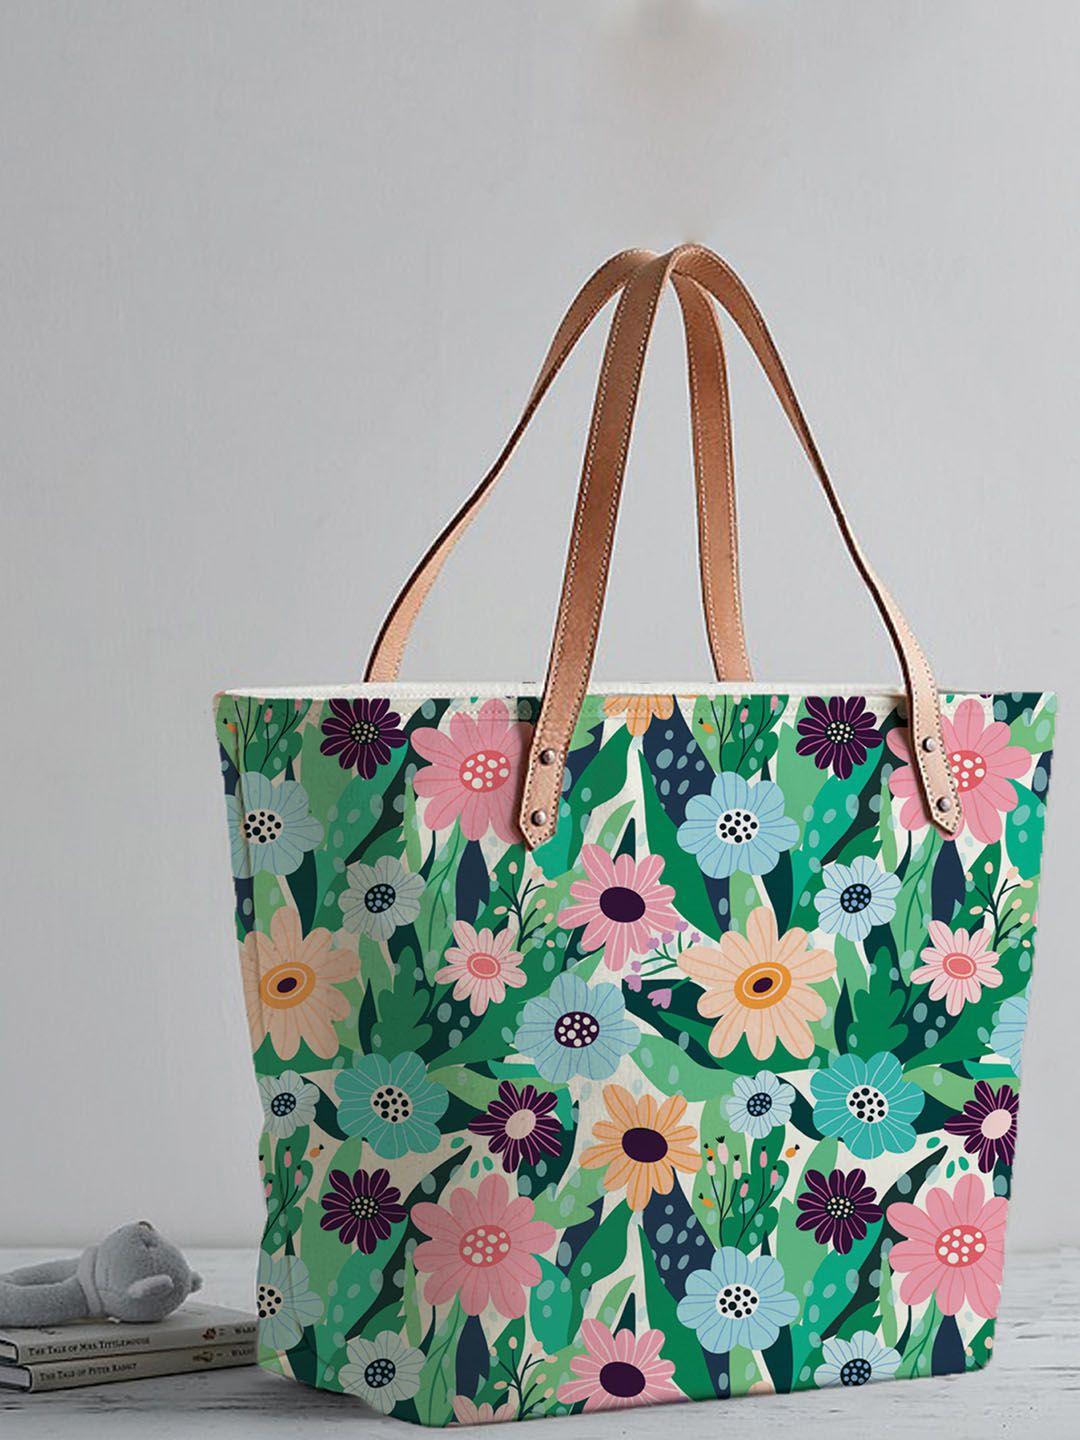 stybuzz green floral printed oversized shopper tote bag with tasselled